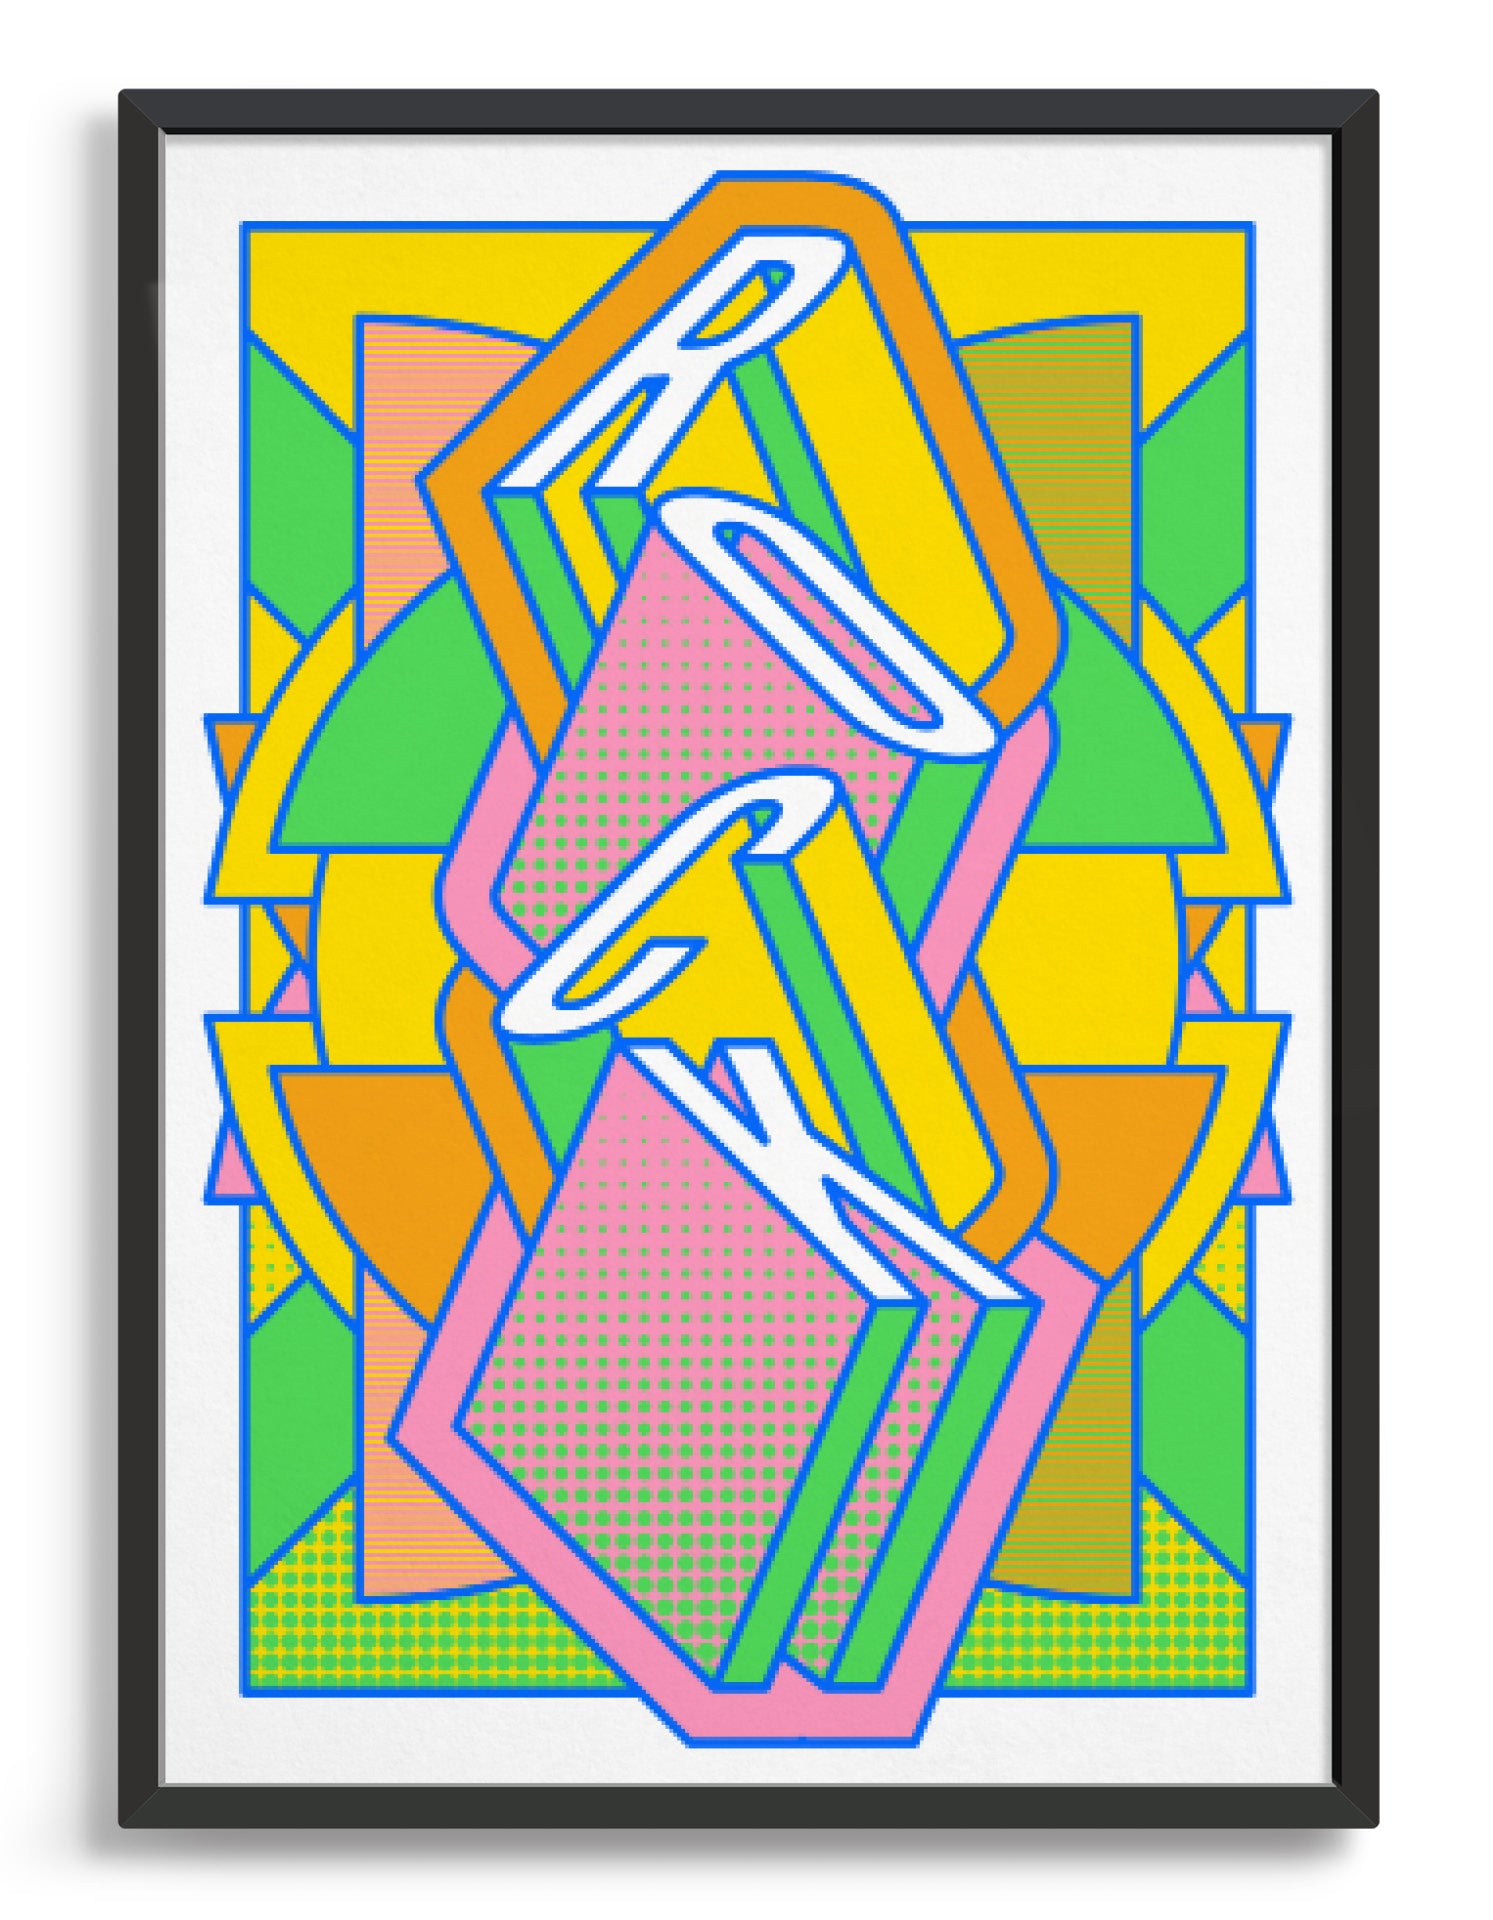 rock music art print featuring a geometric abstract pattern in bold shapes and vibrant rainbow colours. Block typography depicts the word Rock in tumbling text